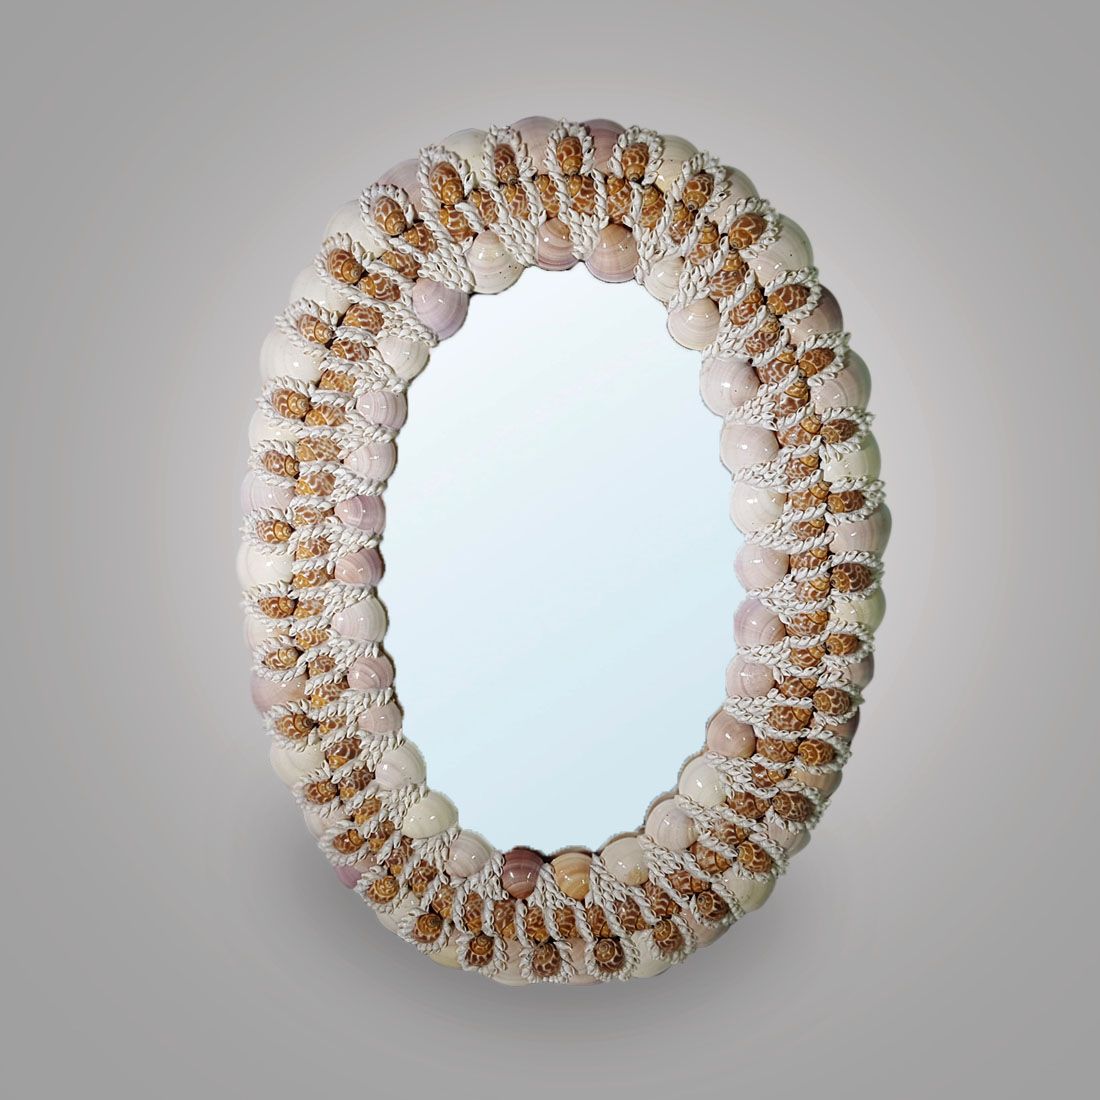 Oval Sea Shell Wall Mirror – Beautiful Handicraft Home Decor Piece Intended For Shell Wall Mirrors (View 12 of 15)